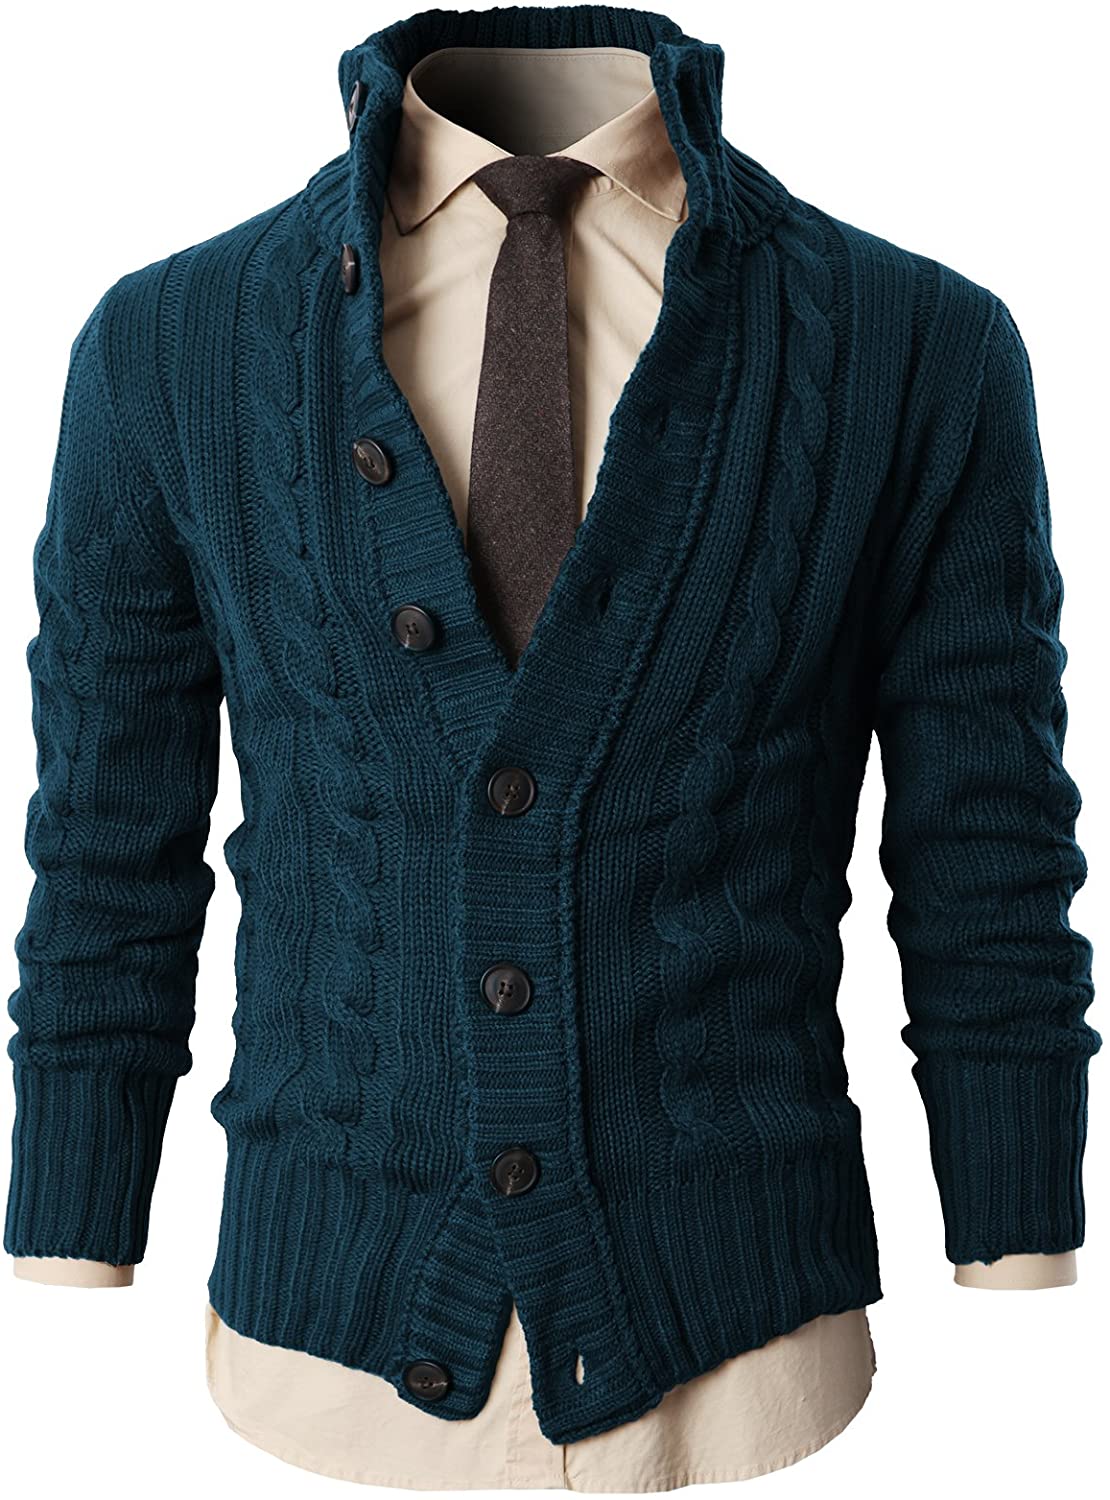 H2H Mens Casual Slim Fit Cardigan Cable Knitted Sweater Thermal Button ...